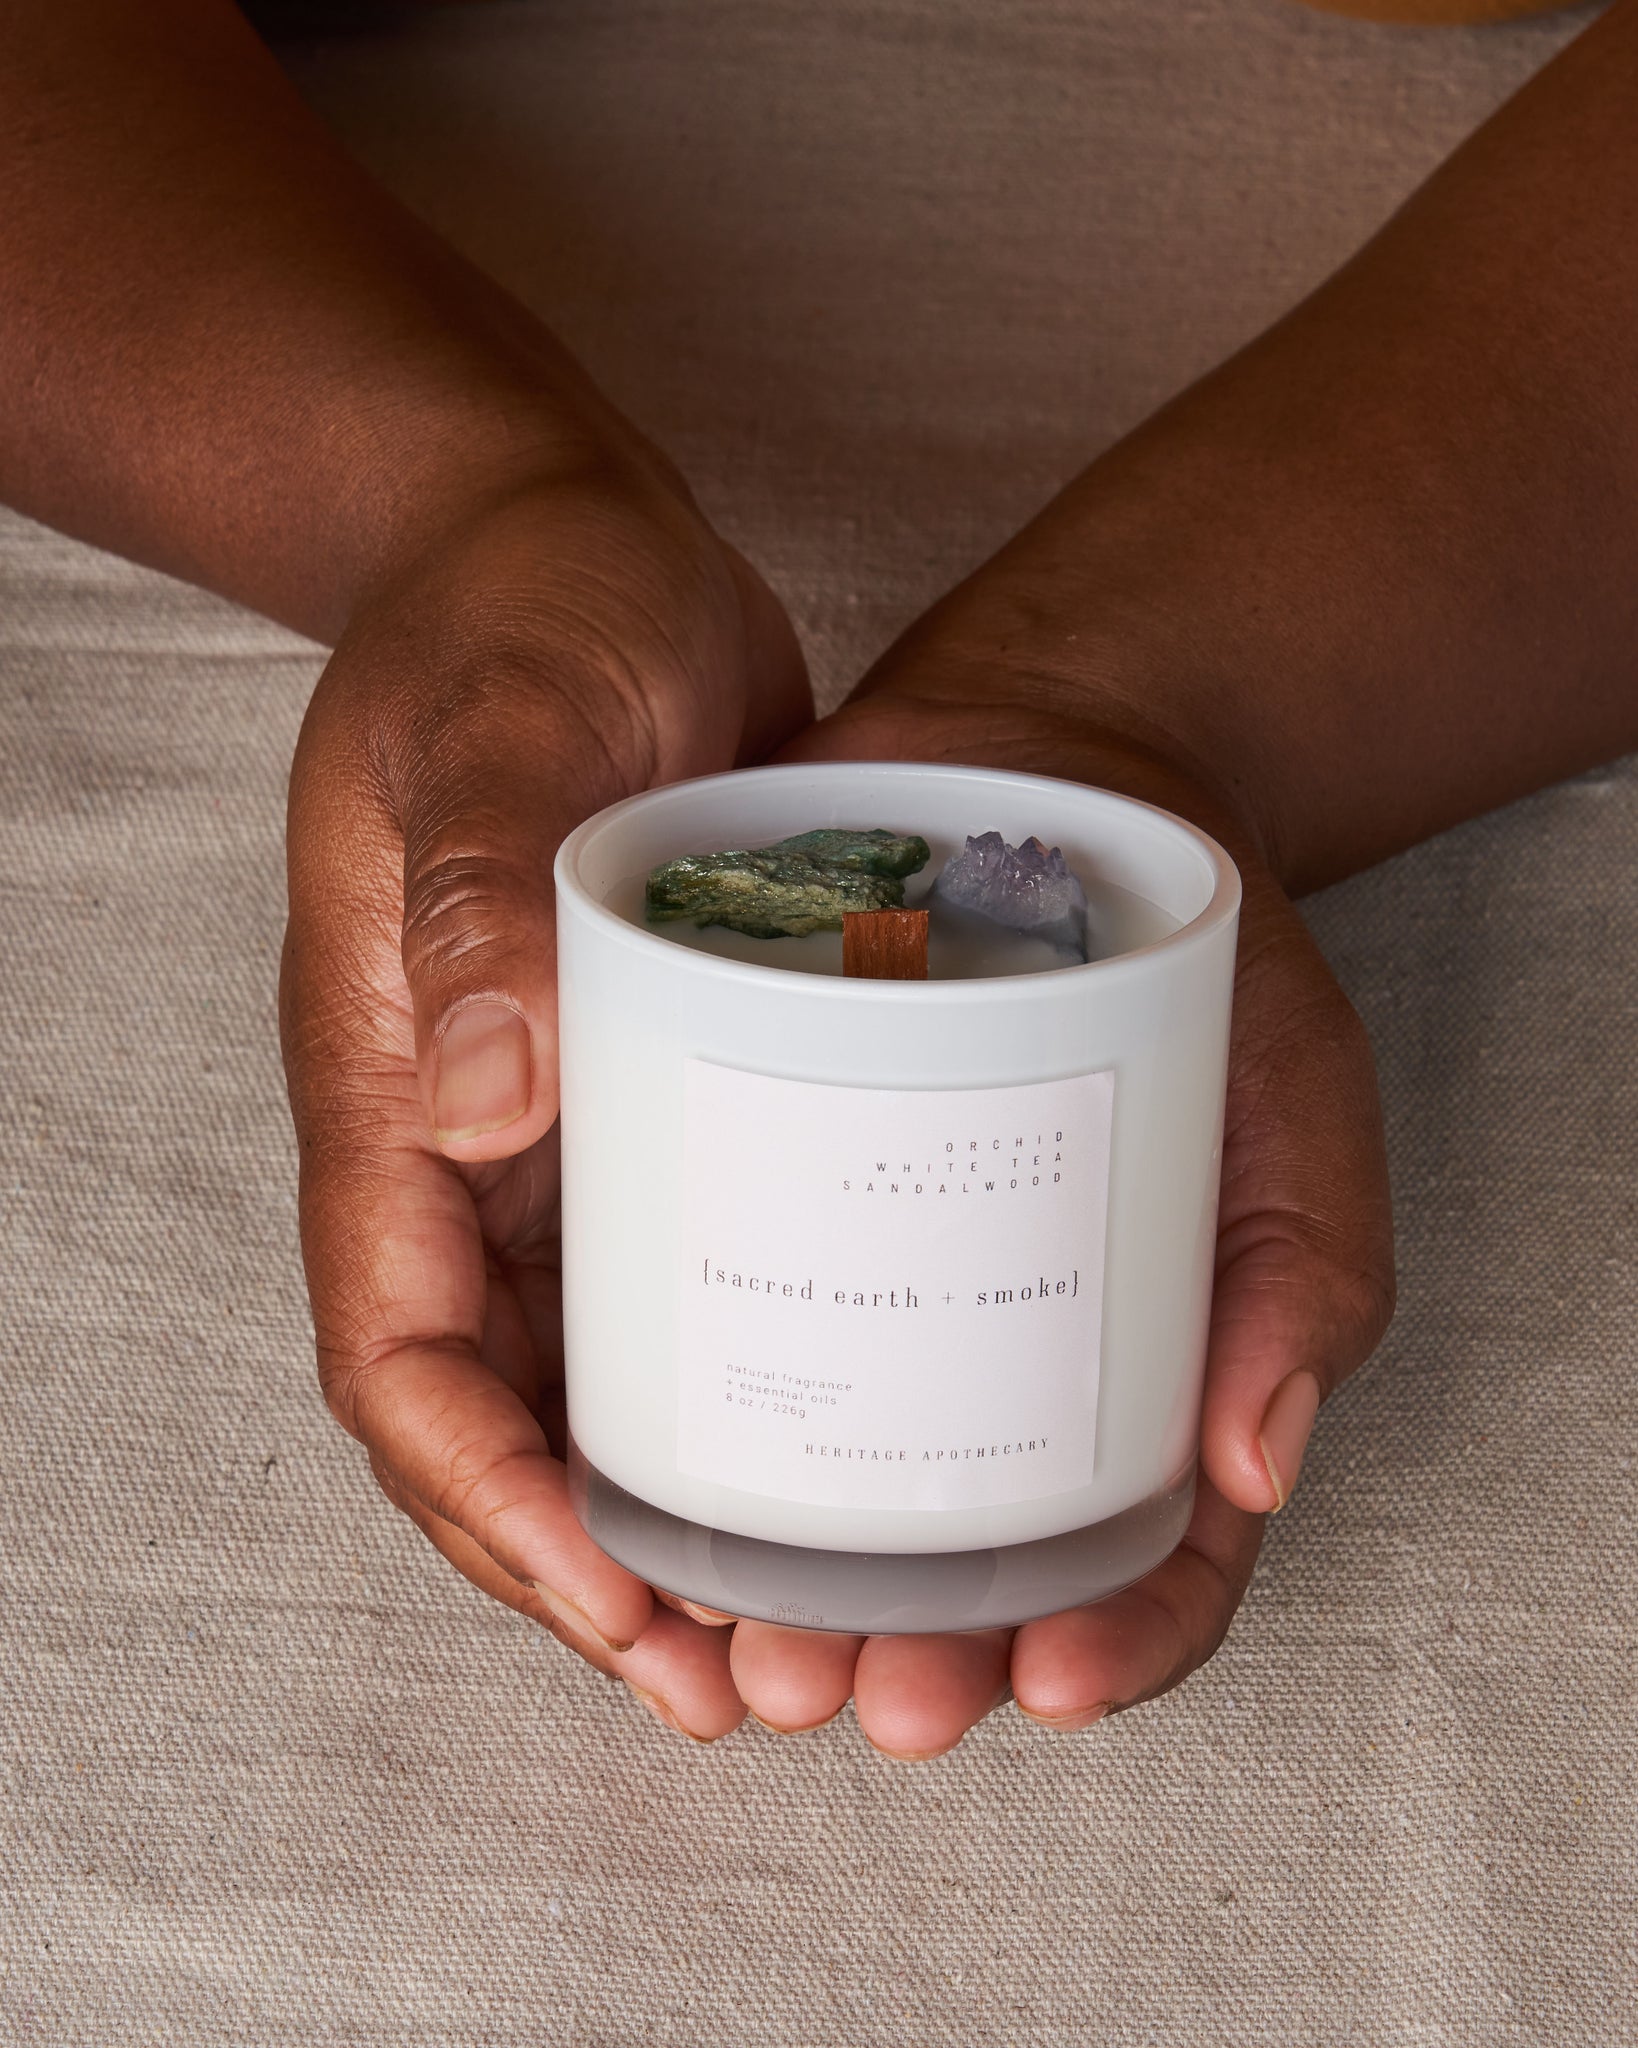 Luxurious coconut and fruit wax candle, perfect for guided mindfulness meditation. Scented with saffron, white tea, and vanilla. Features amethyst and fuschite crystals for spiritual connection and holistic wellness.